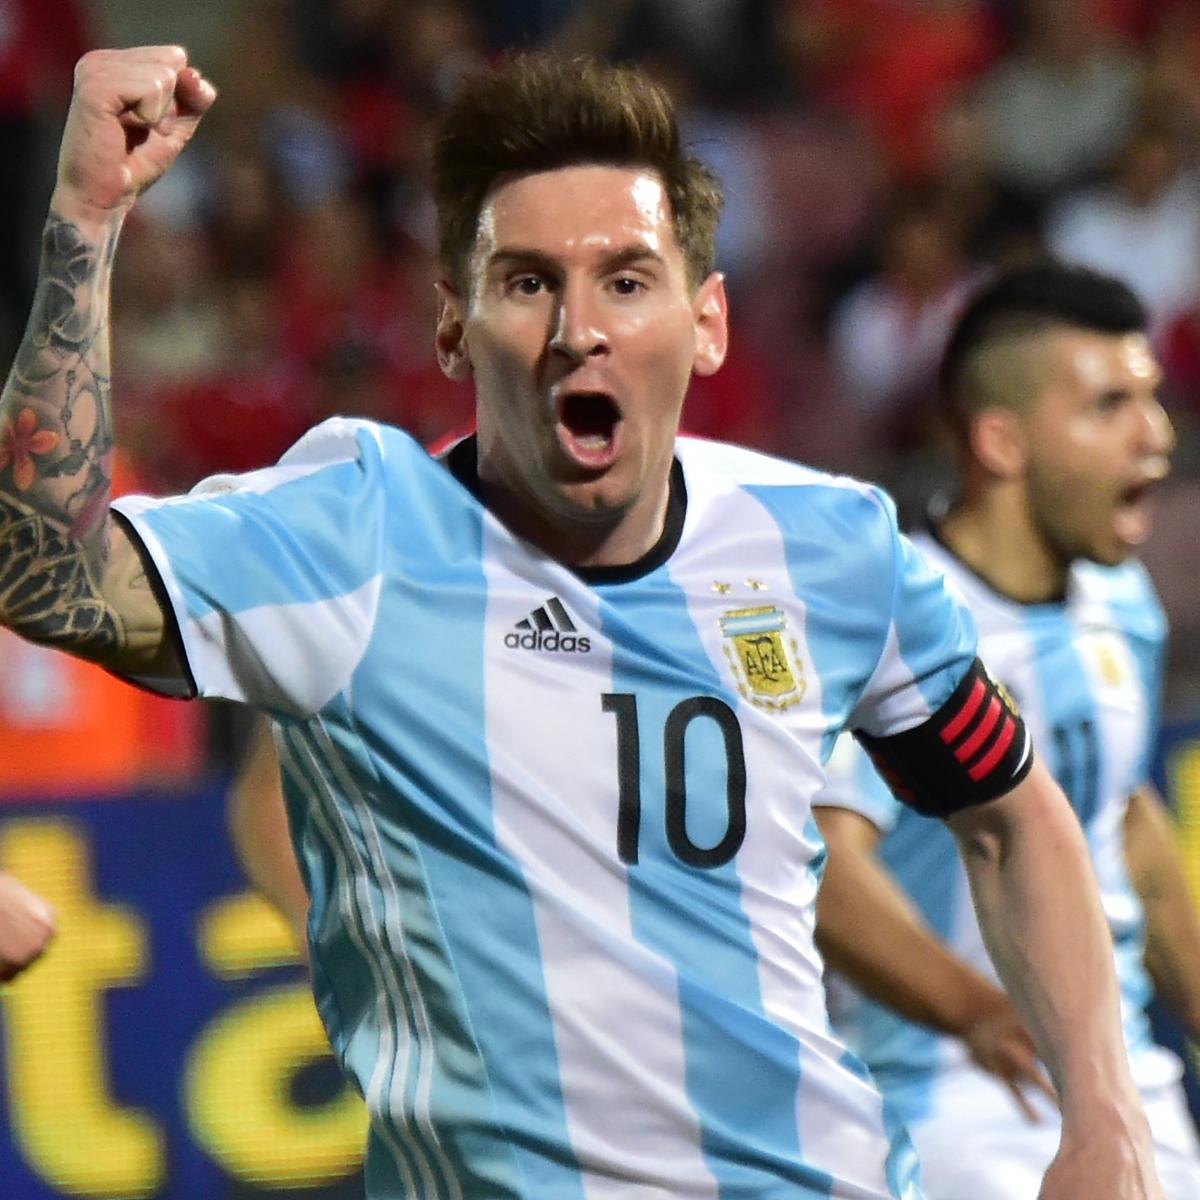 Comparing Lionel Messi's Role for Argentina vs. Role for Barcelona